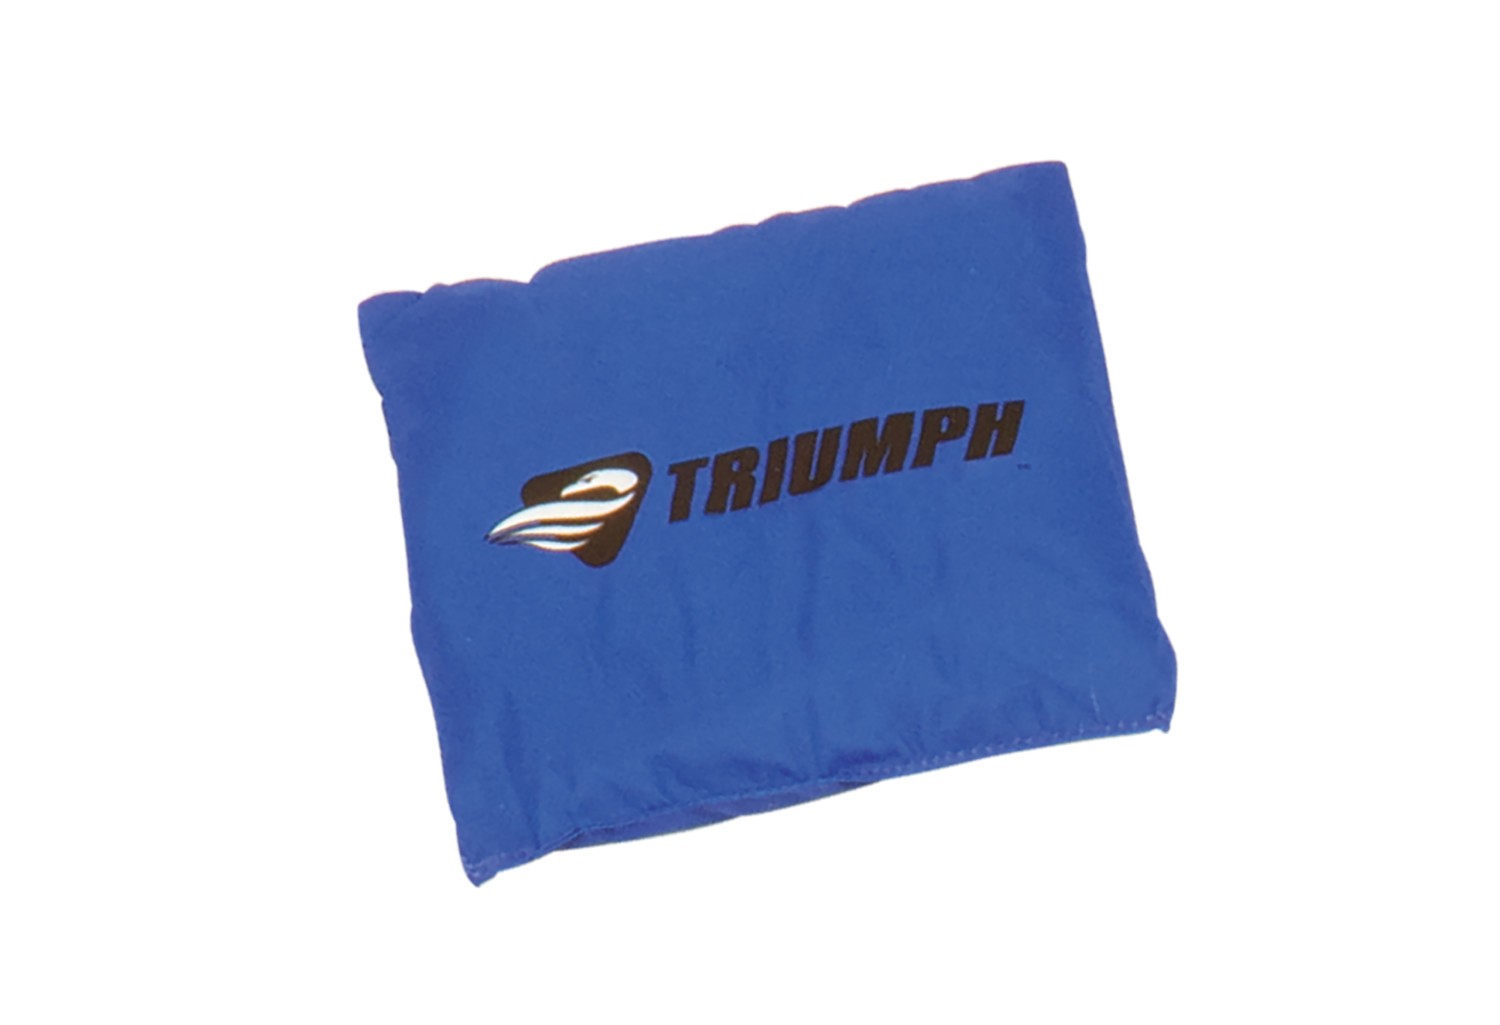 Triumph Tournament Bean Bag Toss Game with Two Wooden Portable Game Platforms on Foldable Legs and Eight Toss Bags - image 8 of 9